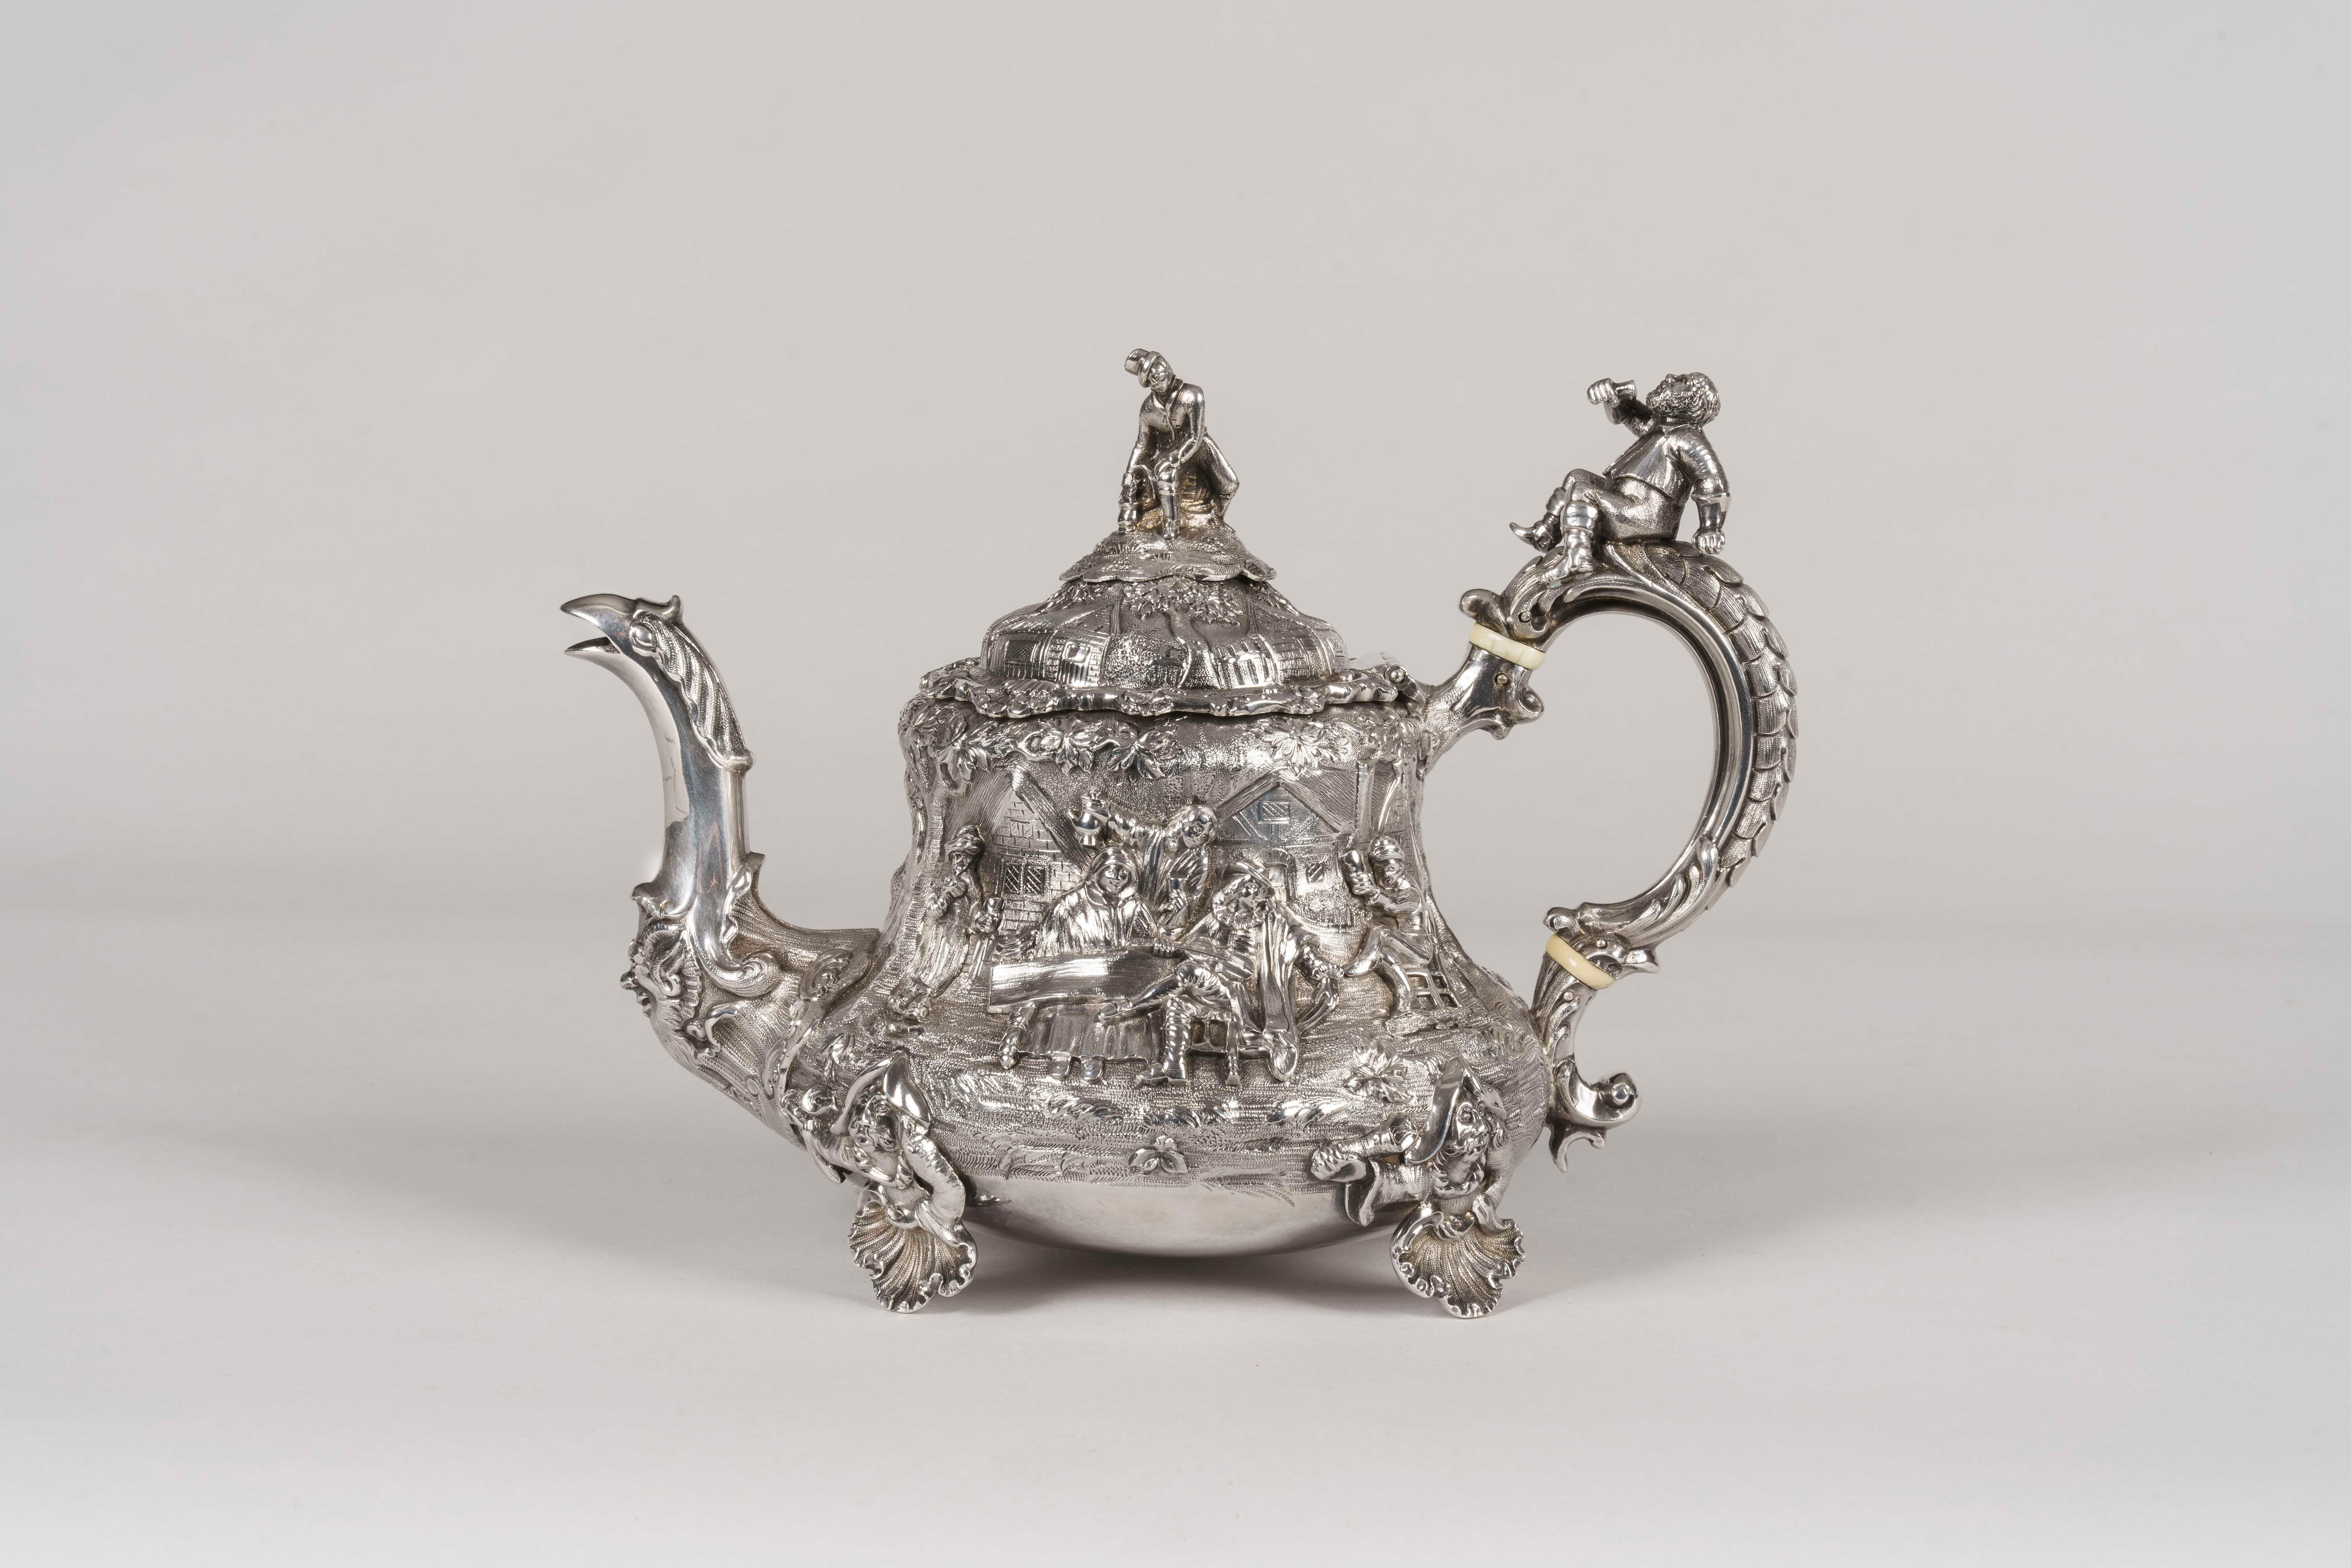 Renaissance Revival 19th Century Silver Tea & Coffee Service Made by Joseph Angell For Sale